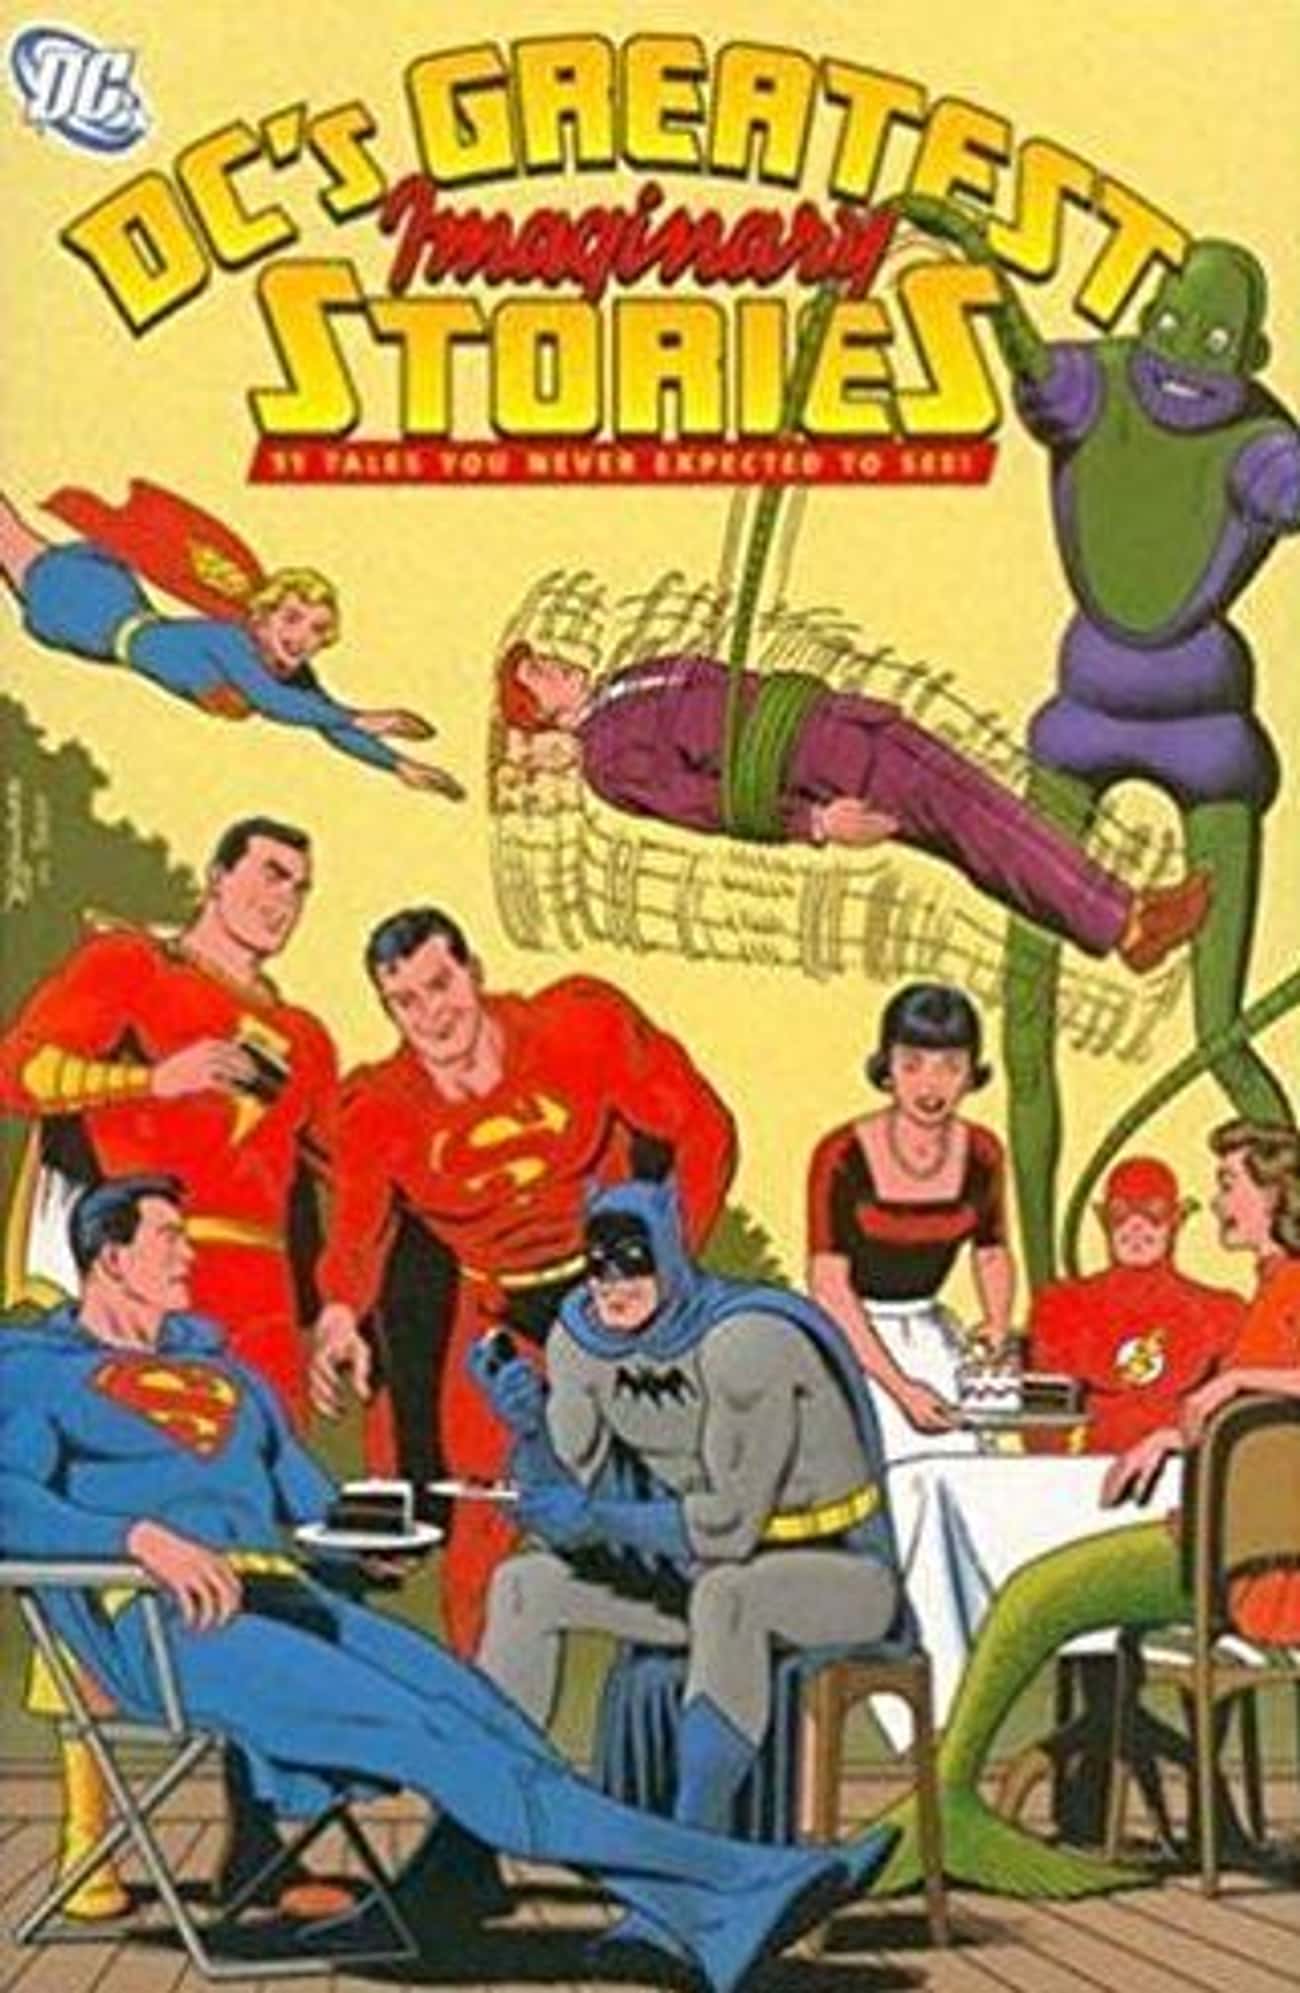 'Elseworlds' Started As ‘Imaginary Stories’